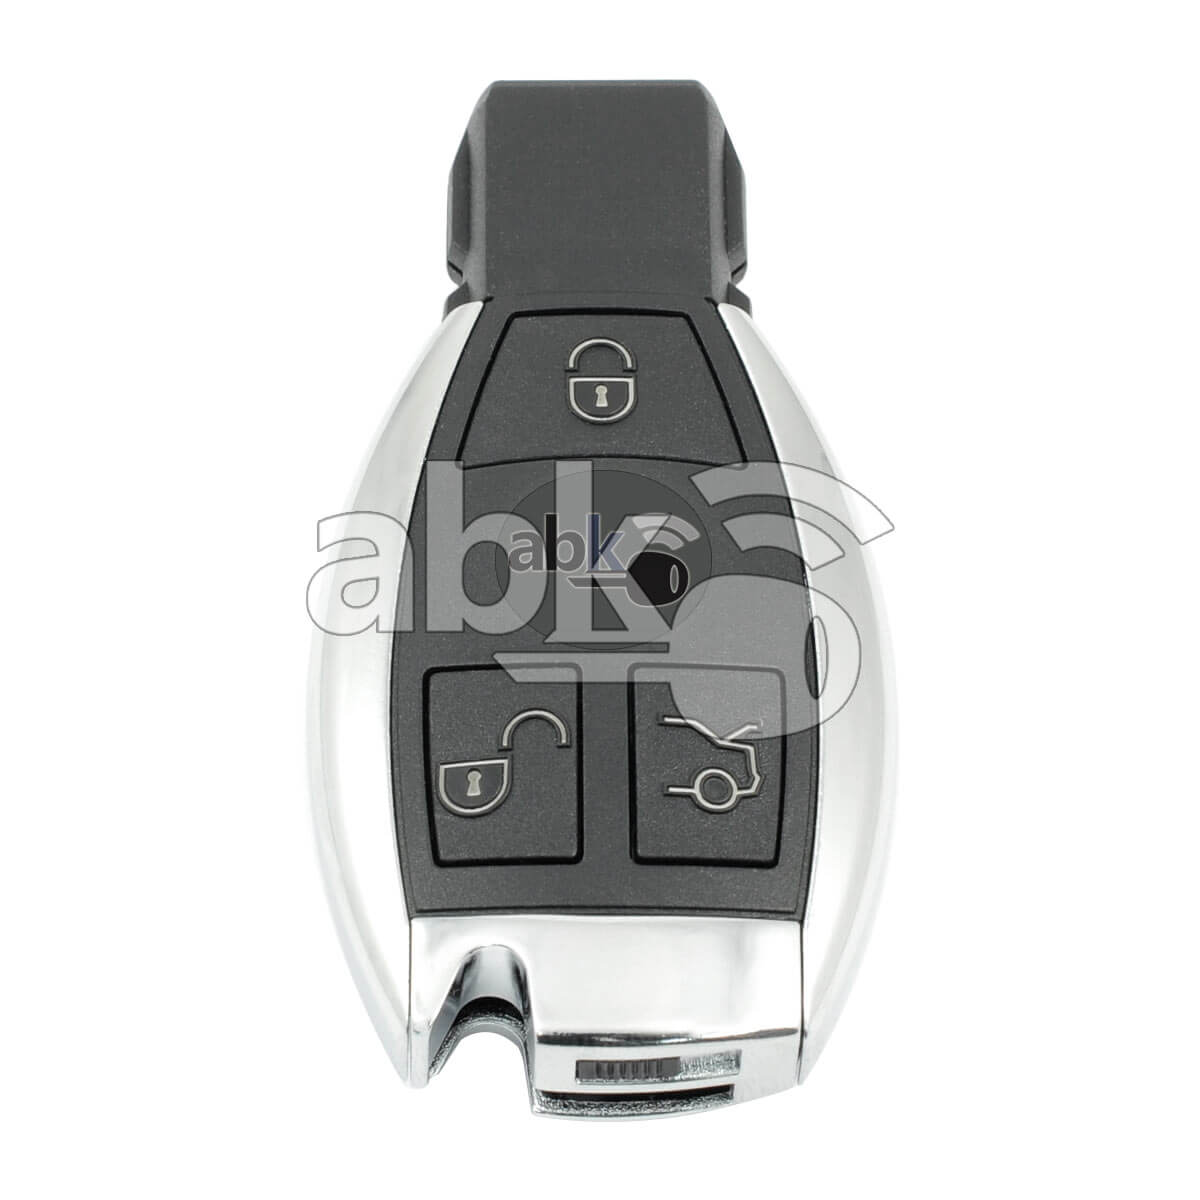 CG MB 08 Version Keyless Go Key 2-in-1 315MHz/433MHz with Shell for  Mercedes W164 W221 W216